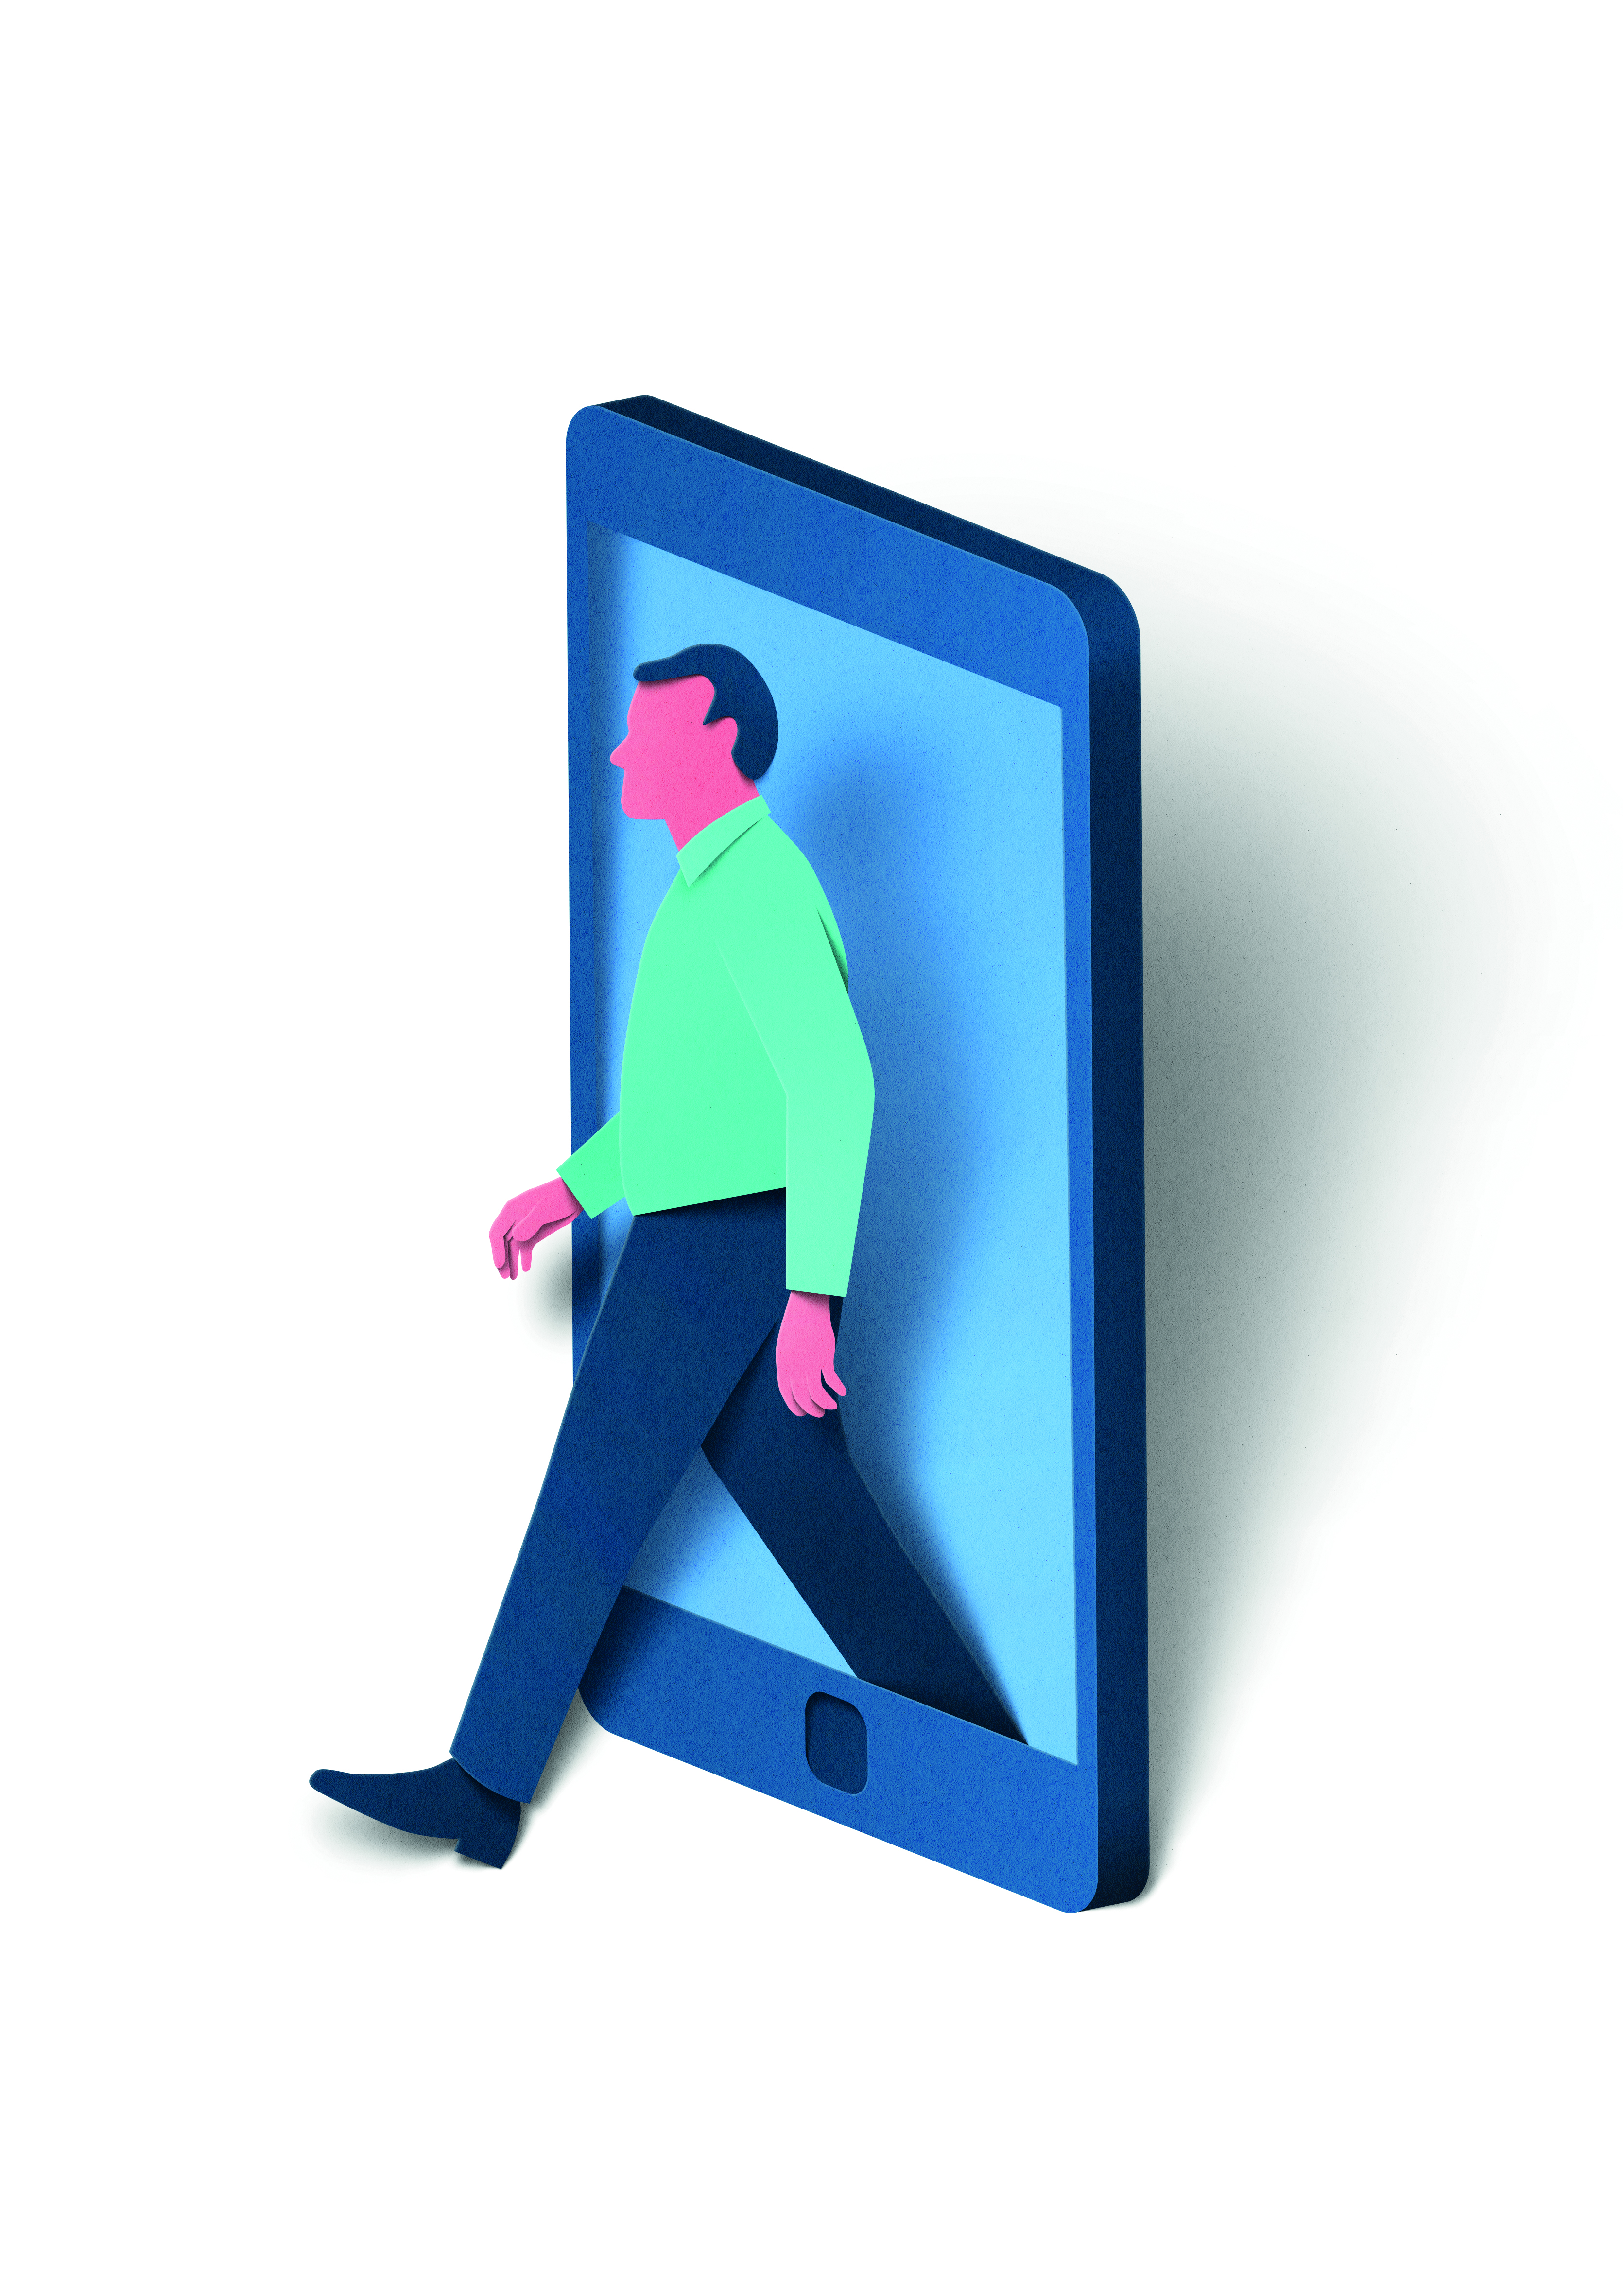 Illustration of a man and a mobile phone